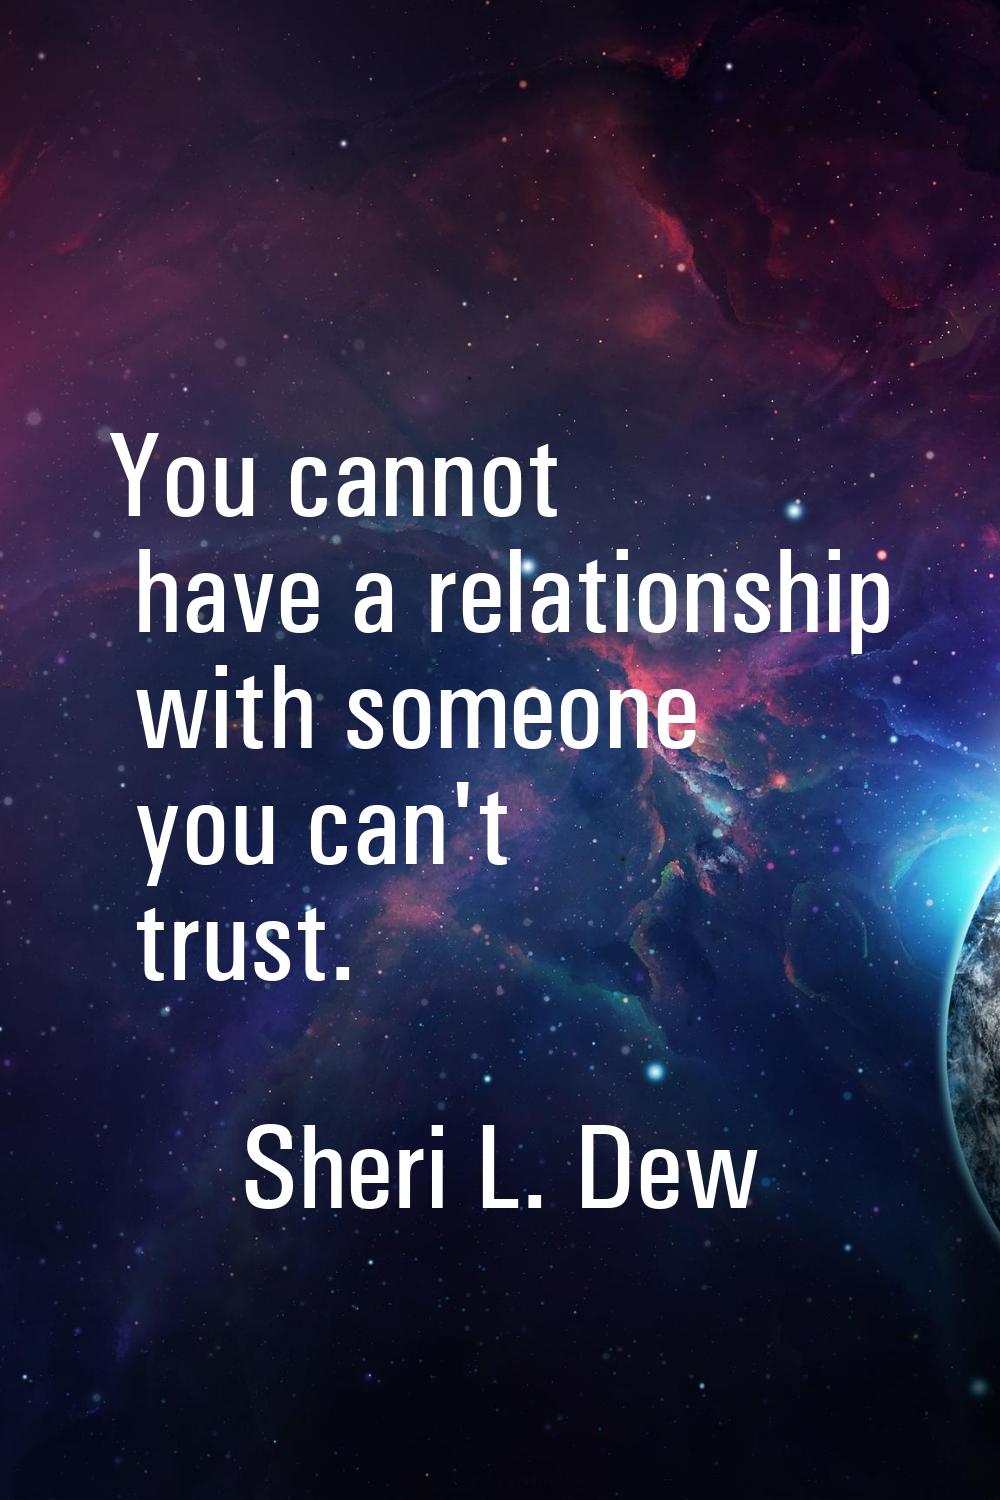 You cannot have a relationship with someone you can't trust.